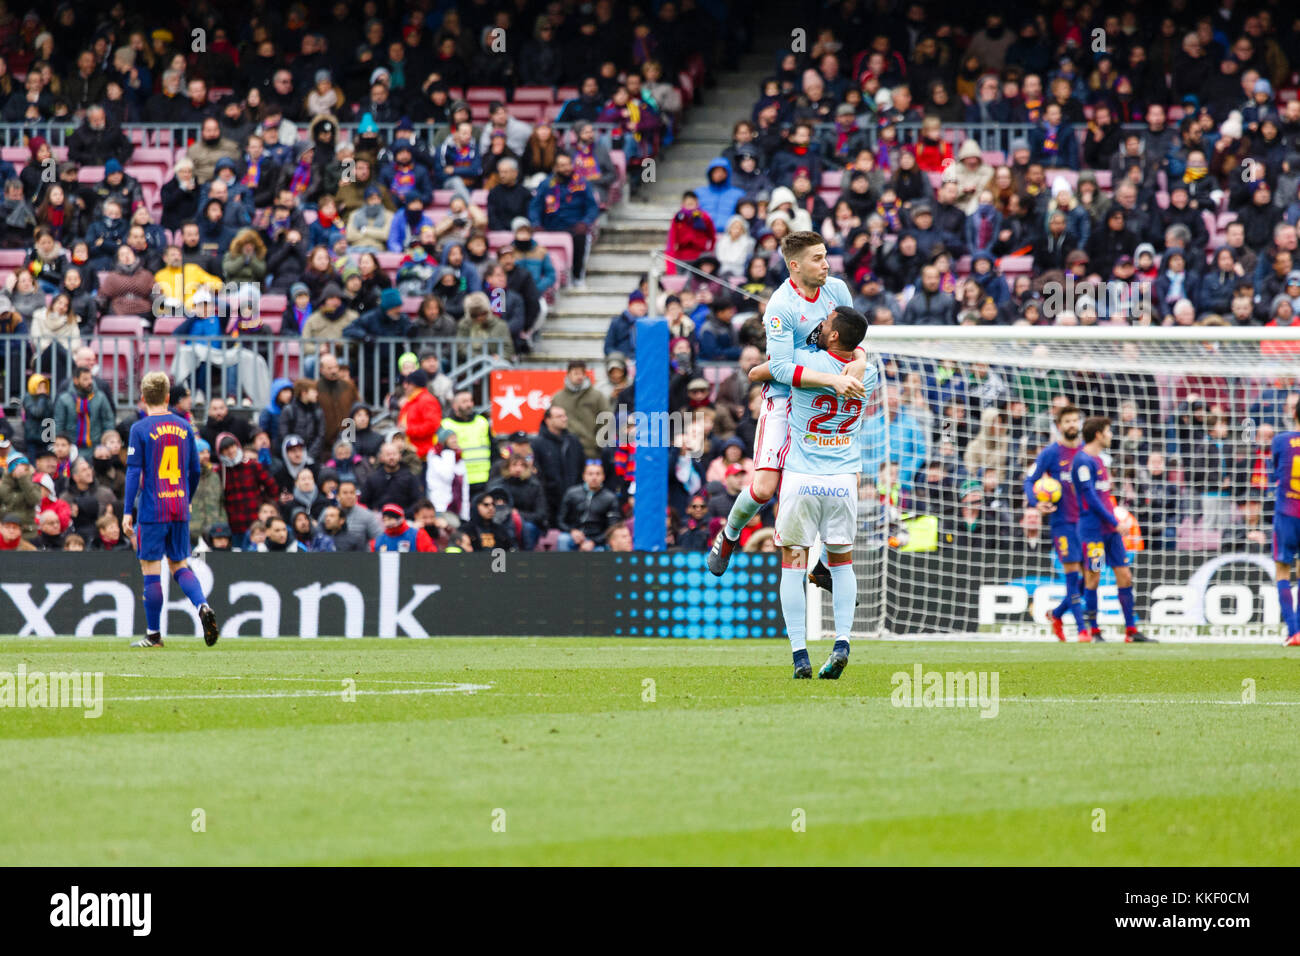 Barcelona, Spain. 02nd Dec, 2017. (03) Fontàs and (22) G.Cabral celebrating the draw goal during the match of the La Liga between FC Barcelona and RC Celta at Camp Nou. The match ended in a draw 2-2. Credit: Joan Gosa Badia/Alamy Live News Stock Photo